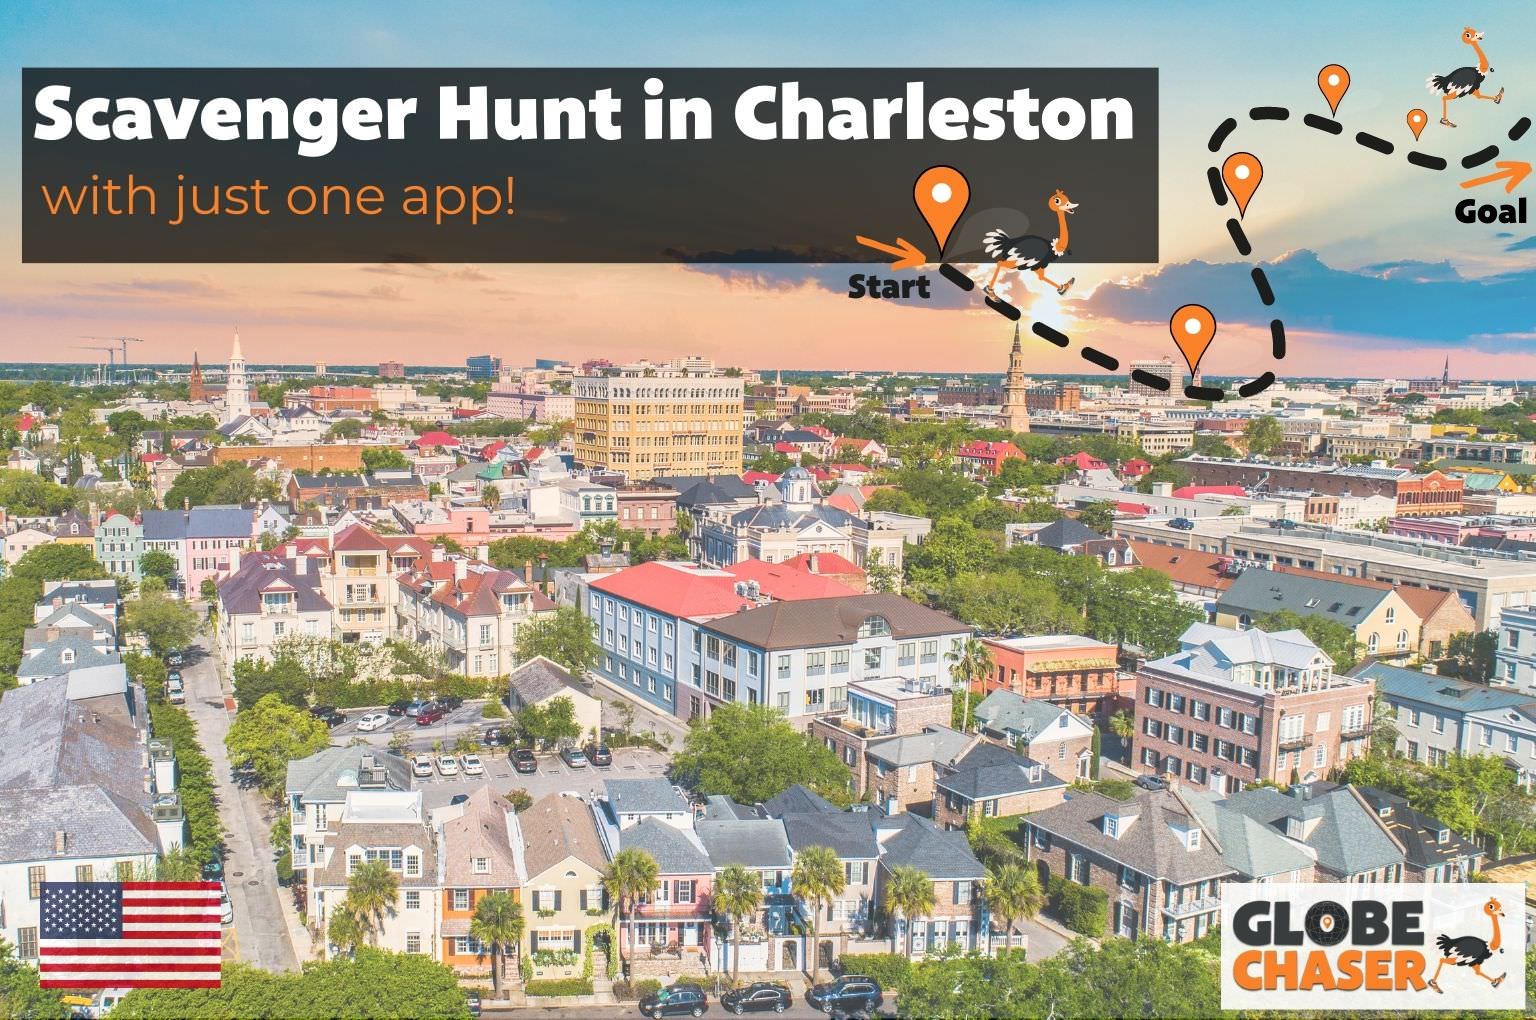 Scavenger Hunt in Charleston, USA - Family Activities with the Globe Chaser App for Outdoor Fun